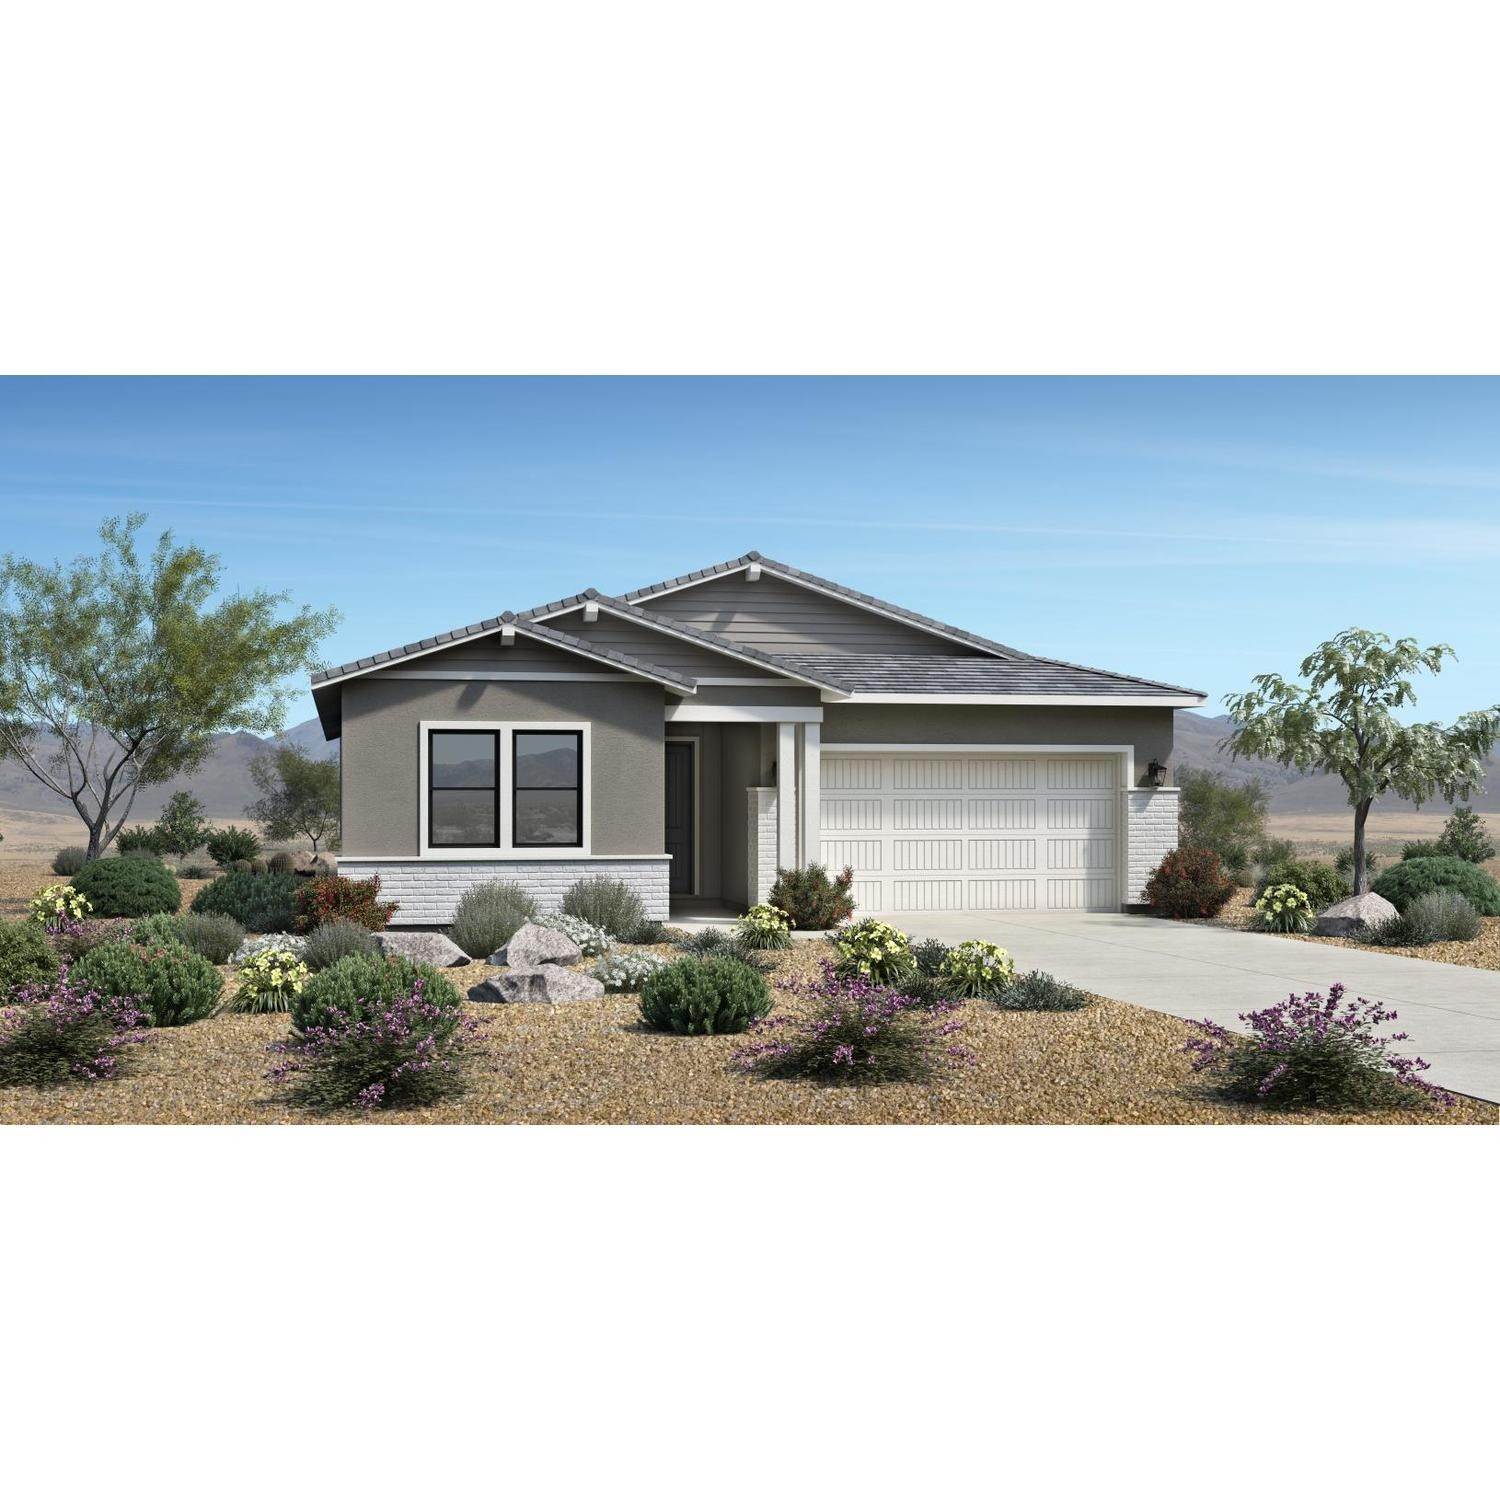 3. Single Family for Sale at Toll Brothers At Cadence - Mosaic Collection 10108 E Tesla Ave, Mesa, AZ 85212